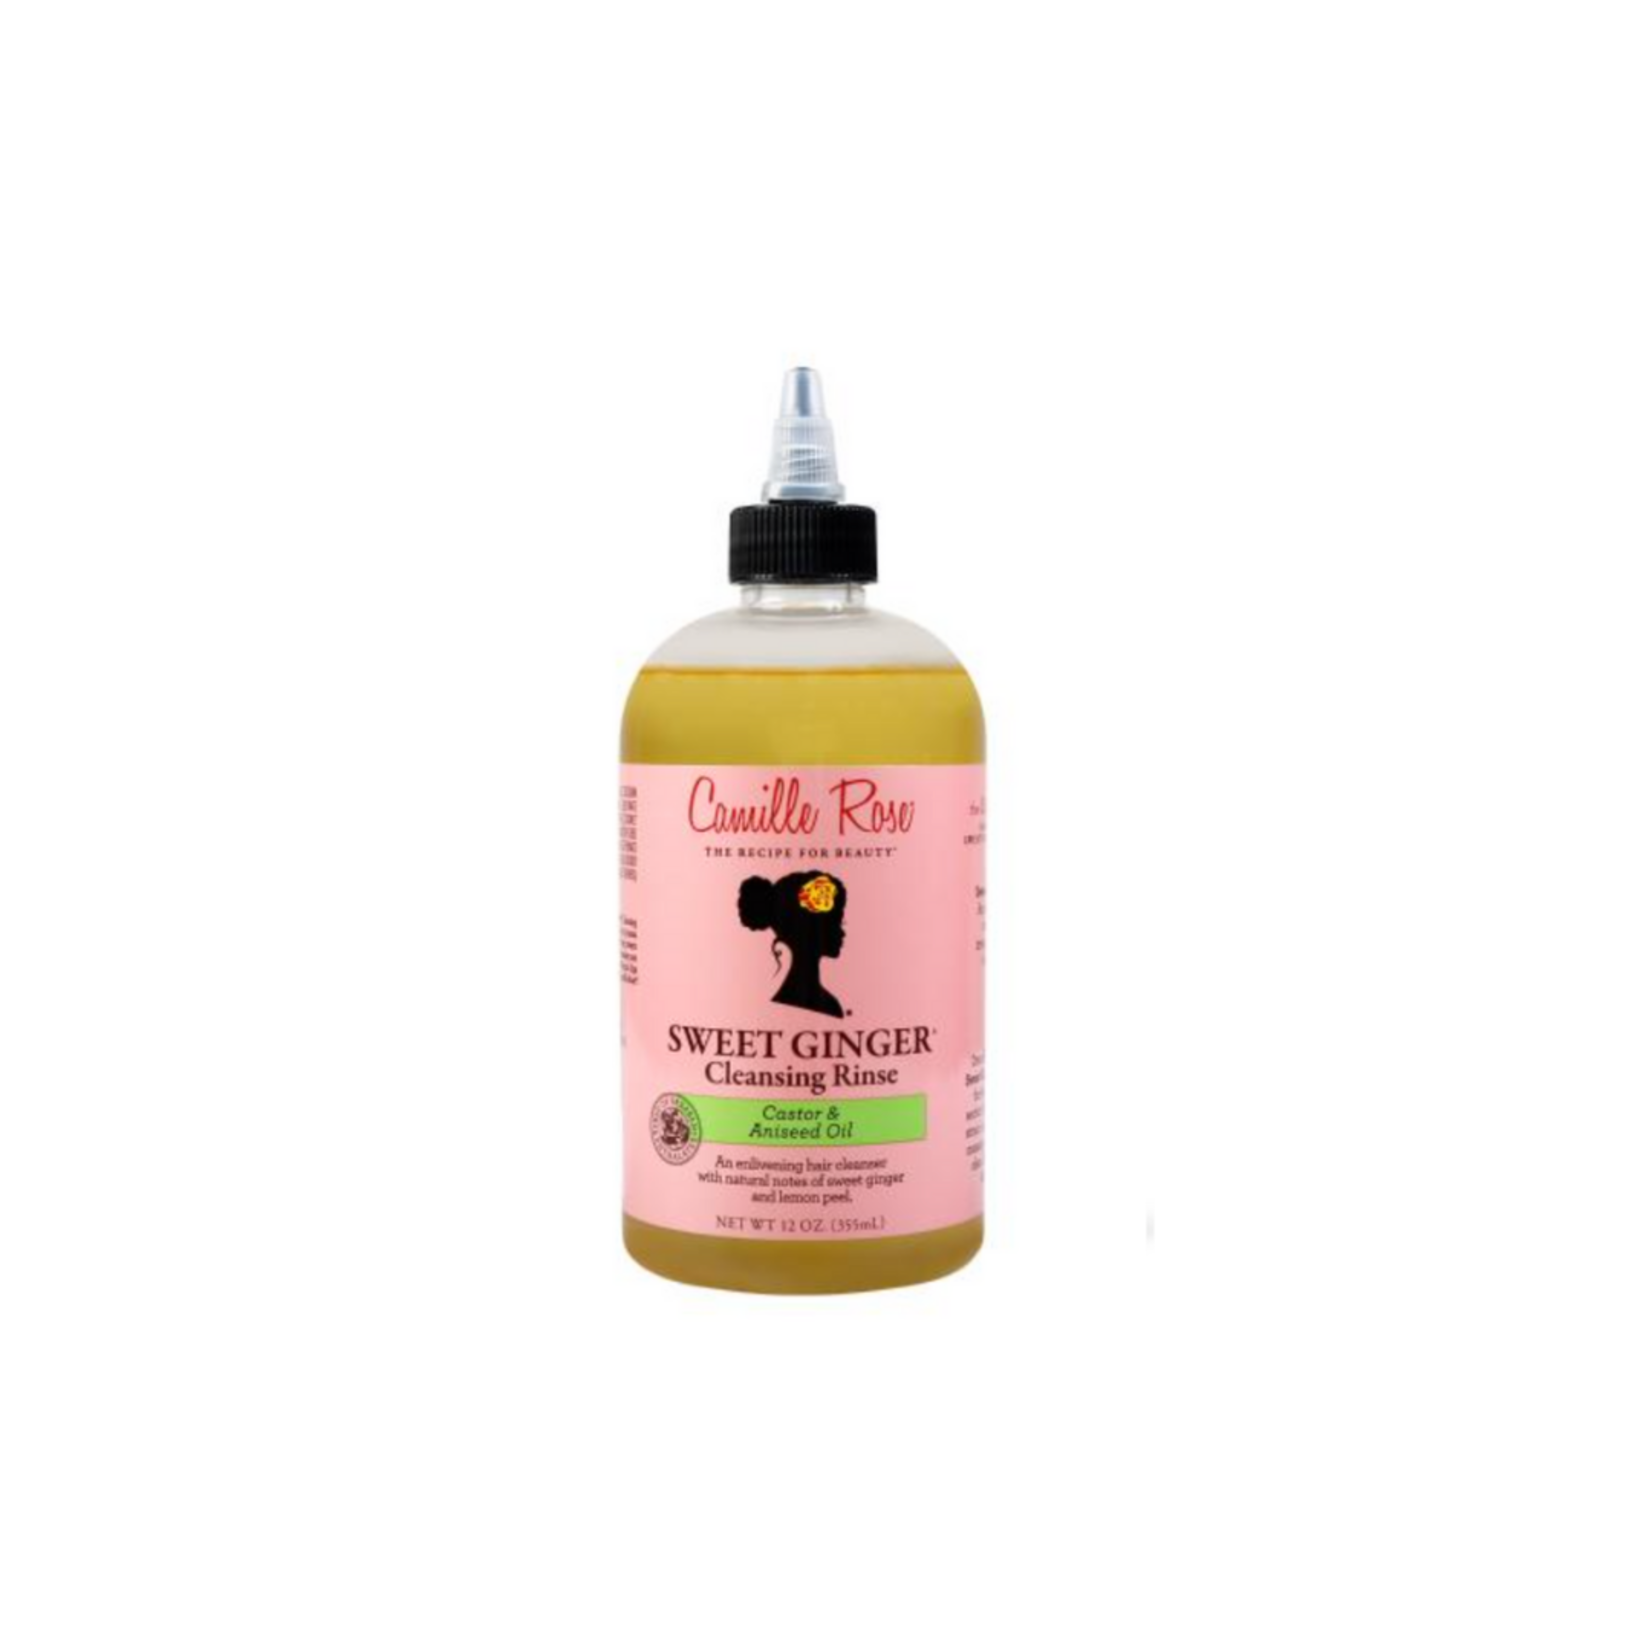 Camille Rose Camille Rose Sweet Ginger Cleansing Rinse